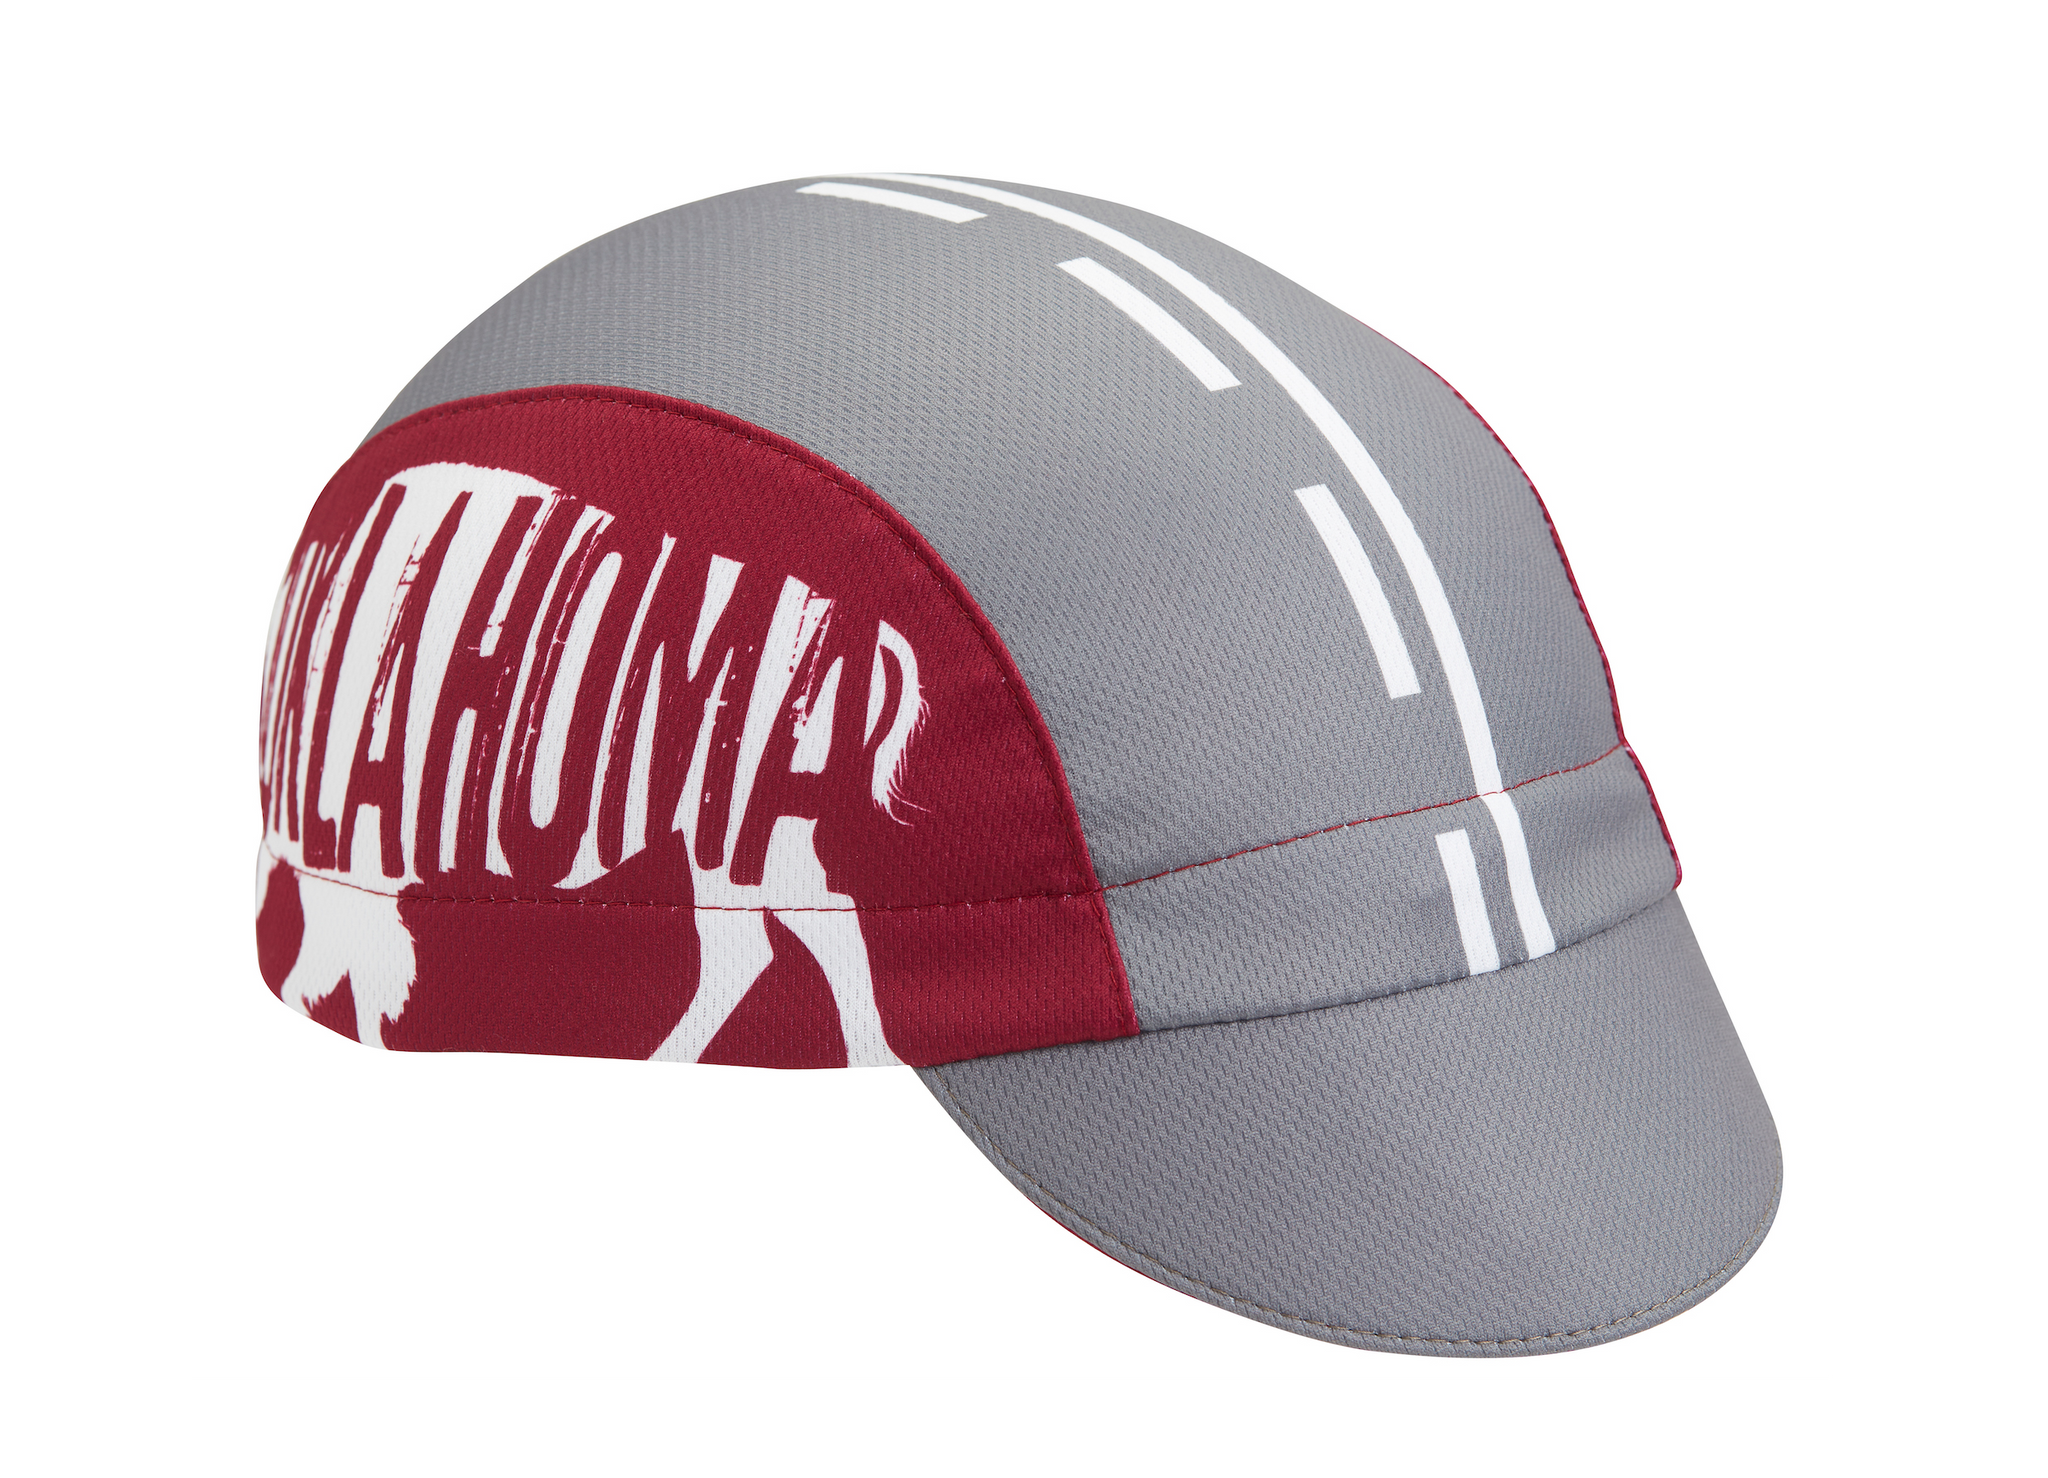 Oklahoma Technical 3-Panel Cycling Cap.  Gray and red cap with Buffalo print and OKLAHOMA text on side.  Angled view.